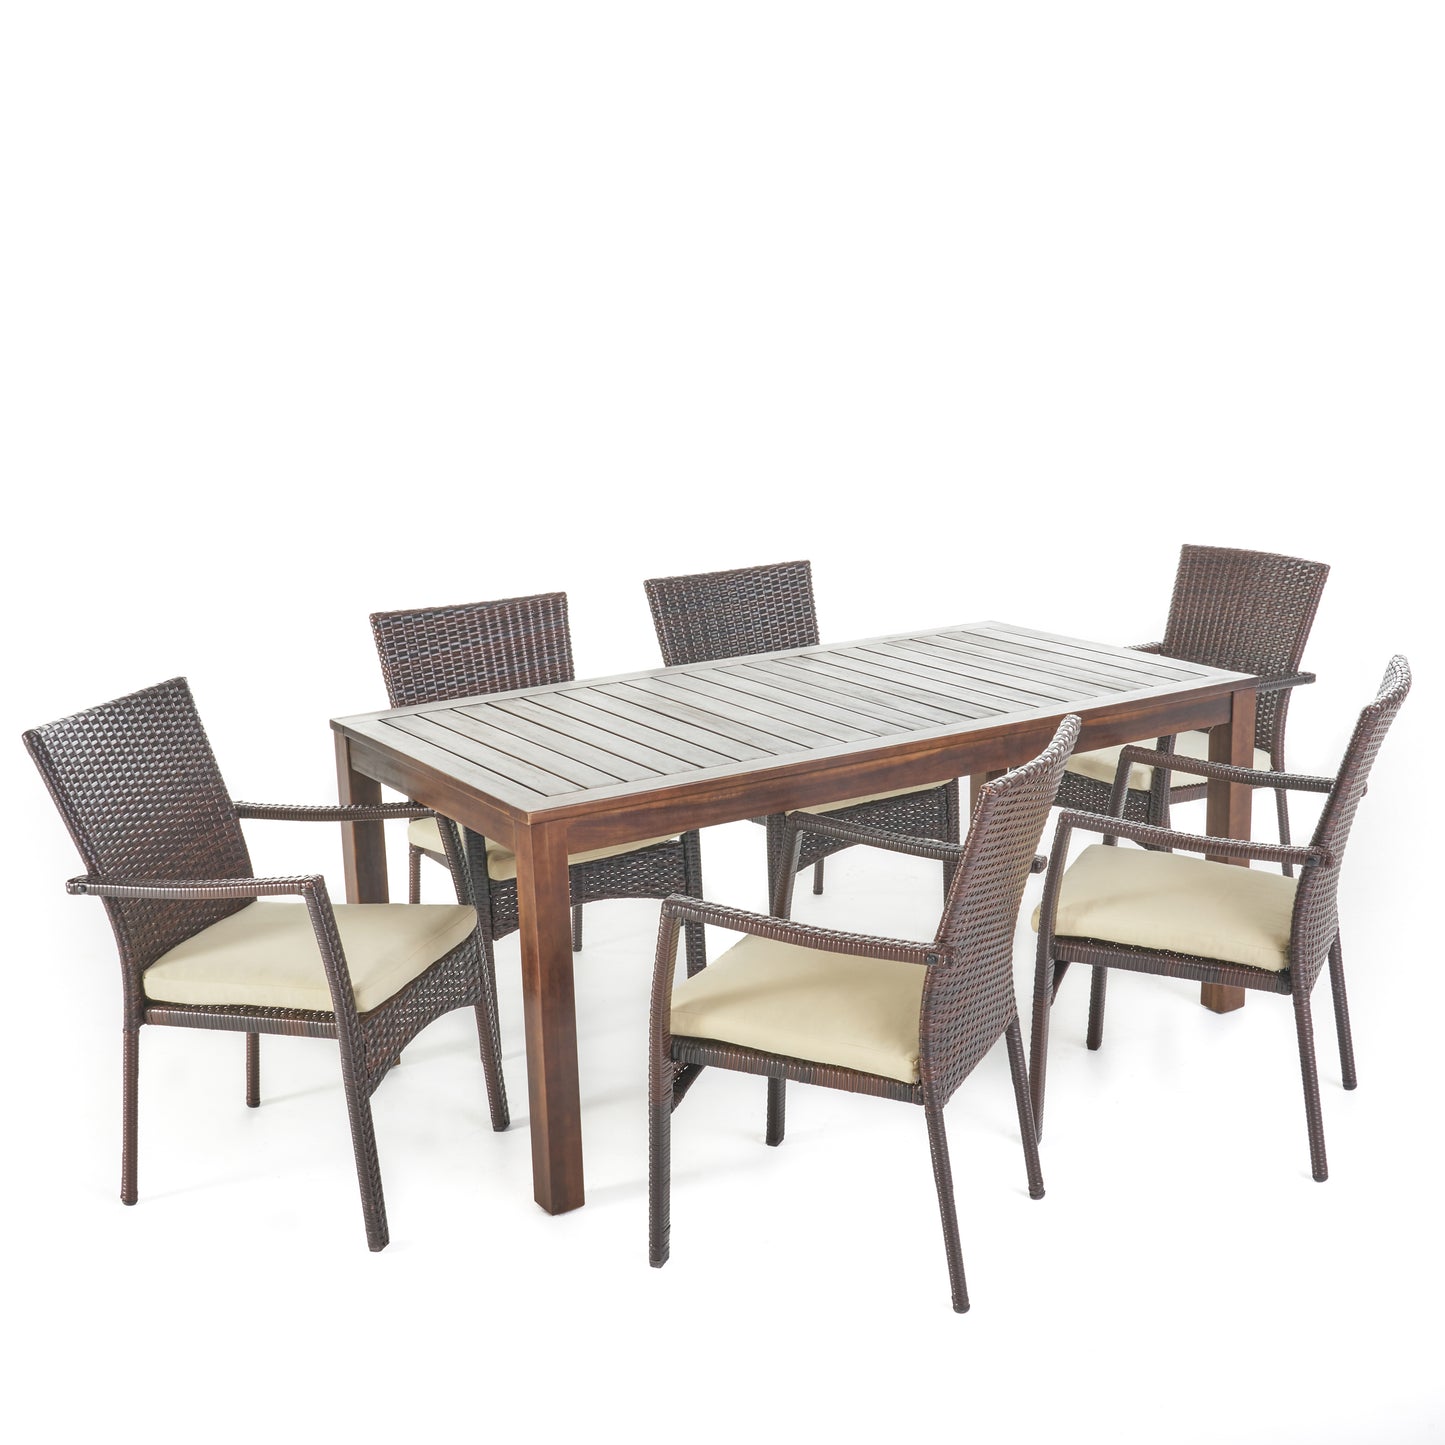 Goodman Outdoor 7 Piece Dining Set with Dark Brown Finished Wood Table and Chairs